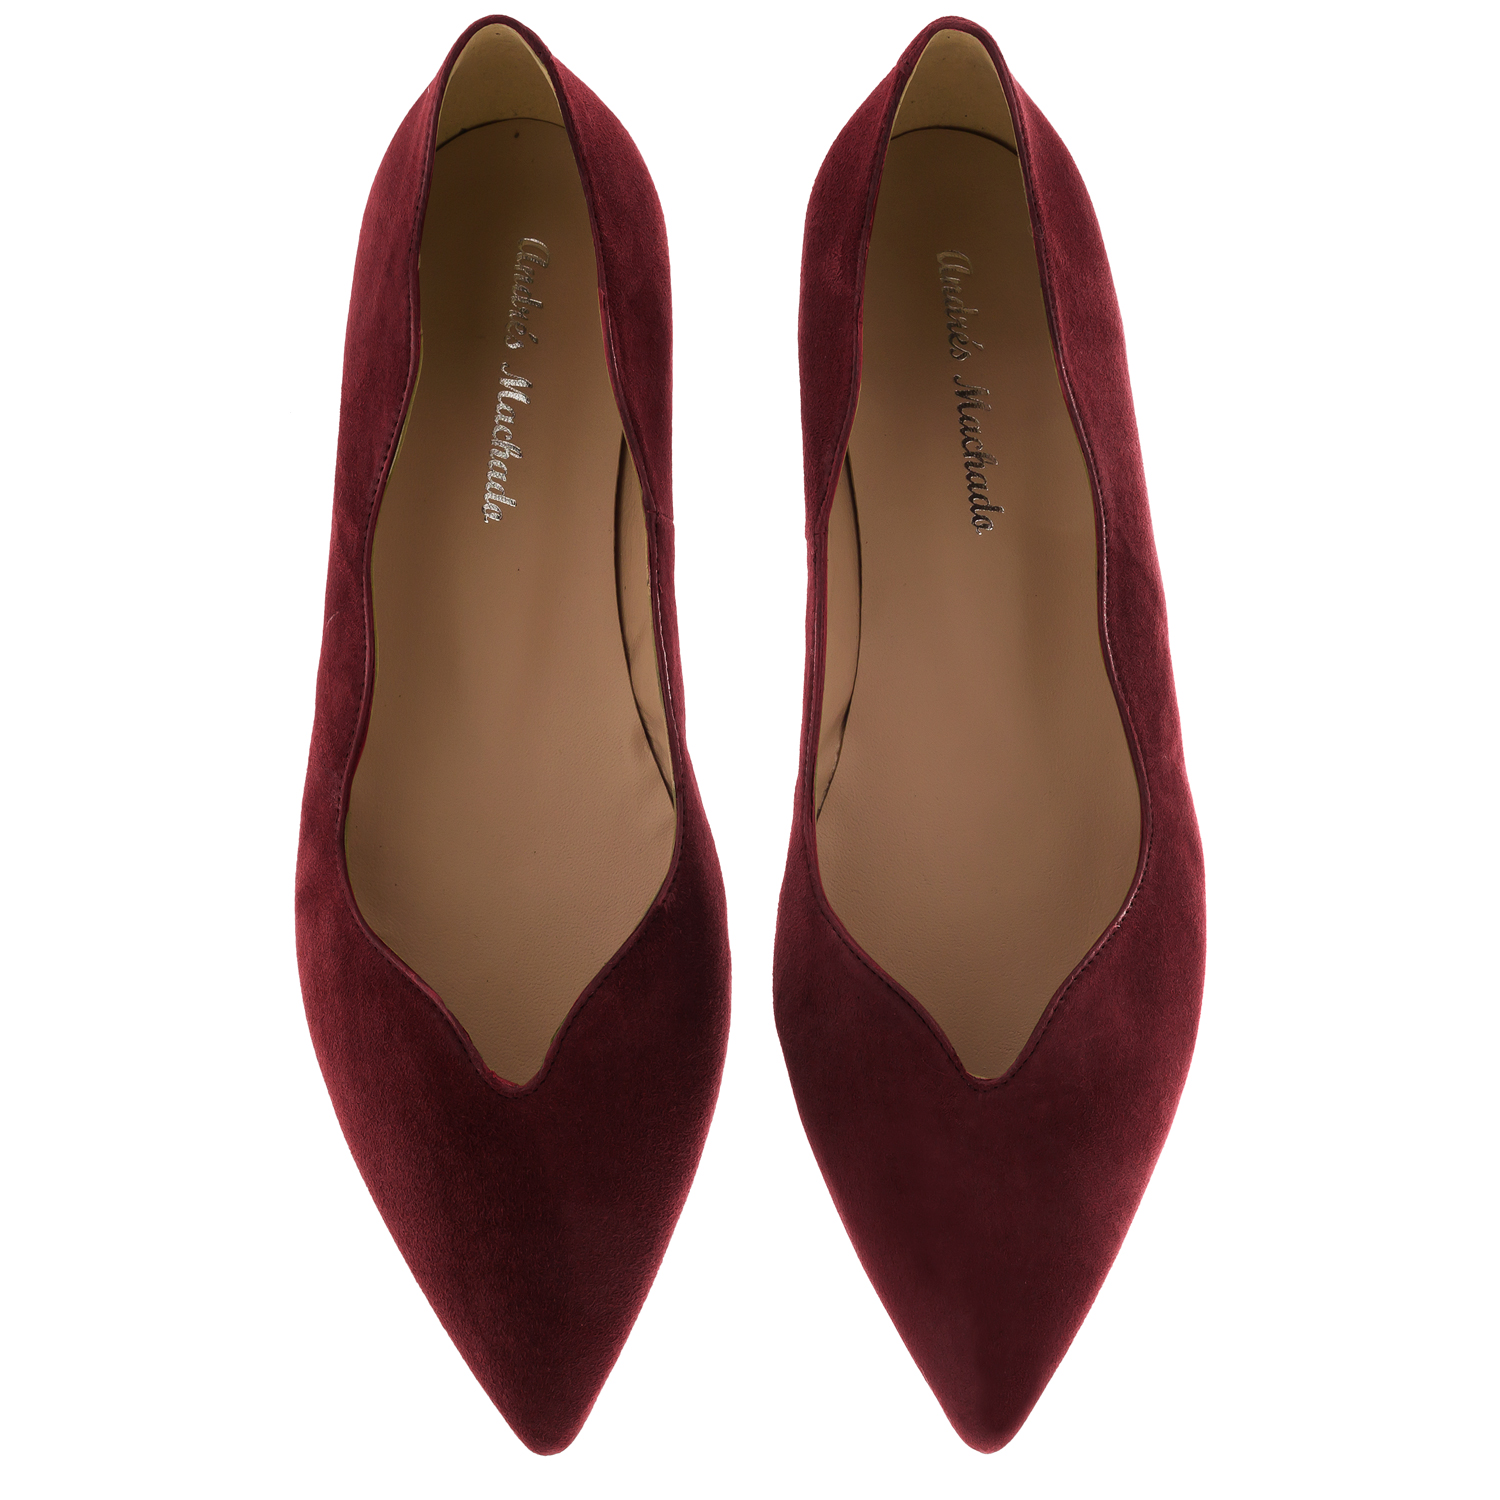 Waved Upper Ballet Flats in Burgundy Nappa Leather 